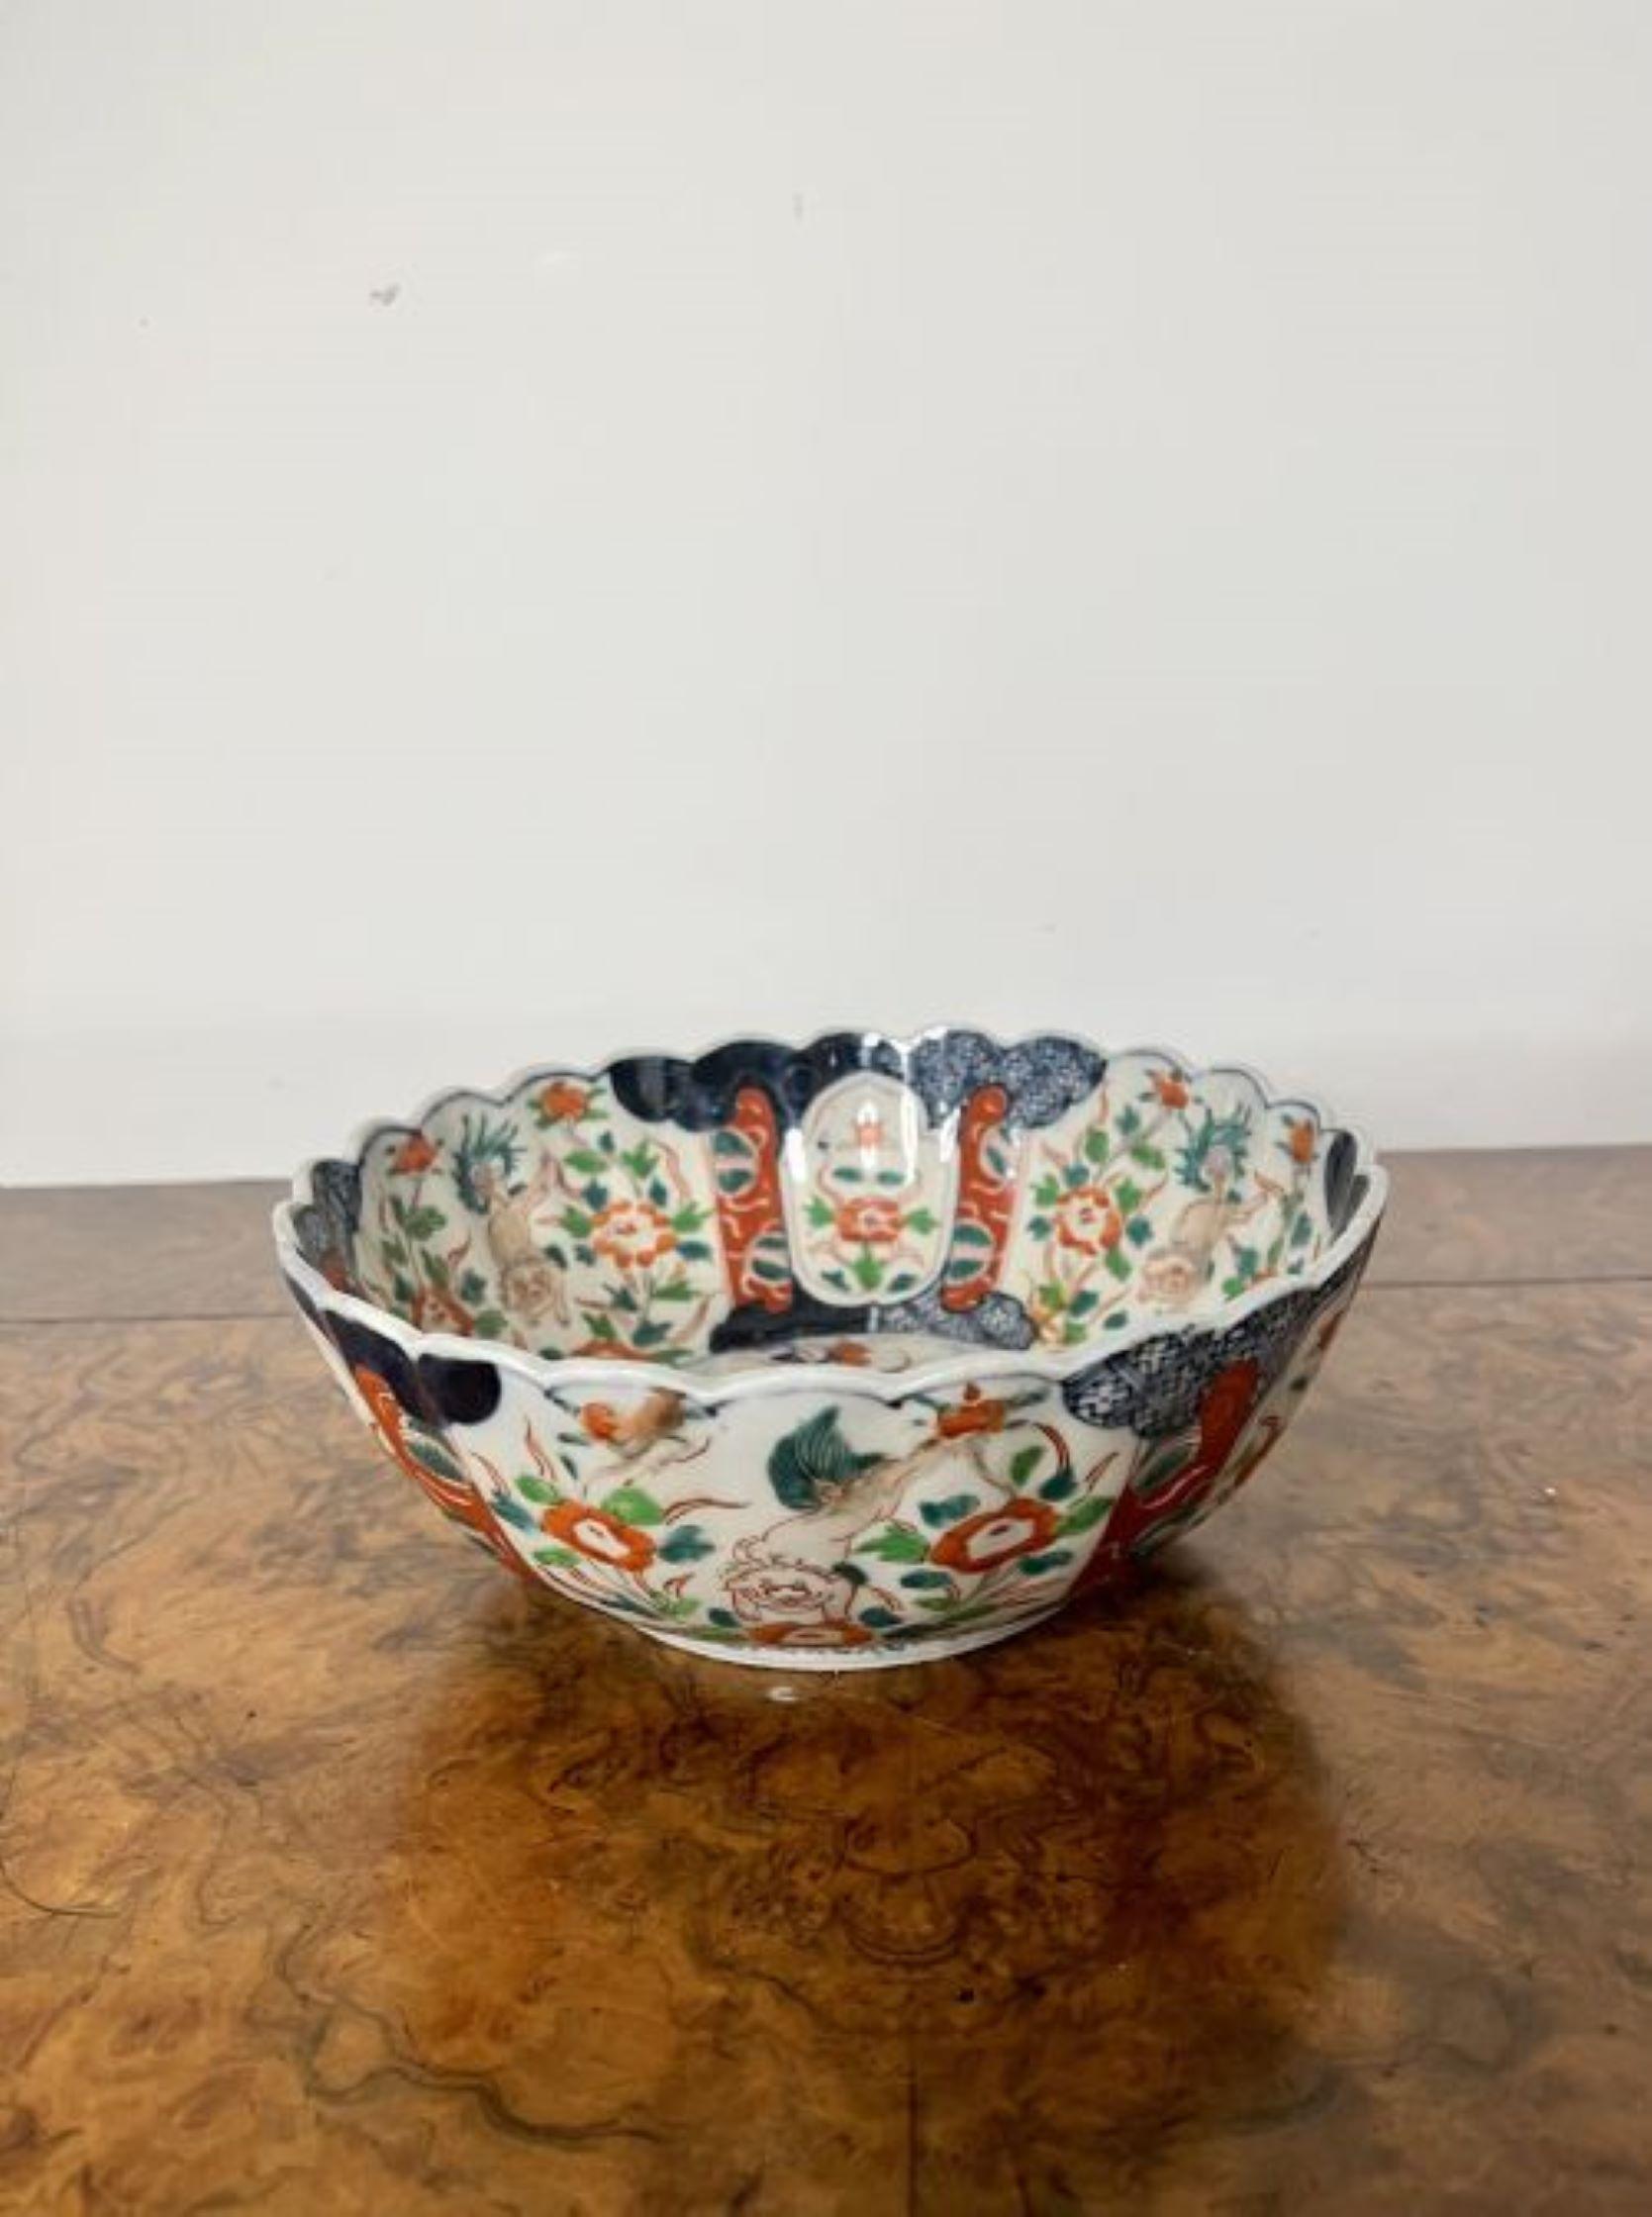 Quality antique Japanese Imari bowl having a scalloped shape edge, to the centre a basket of flowers surrounded by wonderful hand painted panels decorated with flowers, leaves and scrolls in fantastic red, blue, green and white colours.
